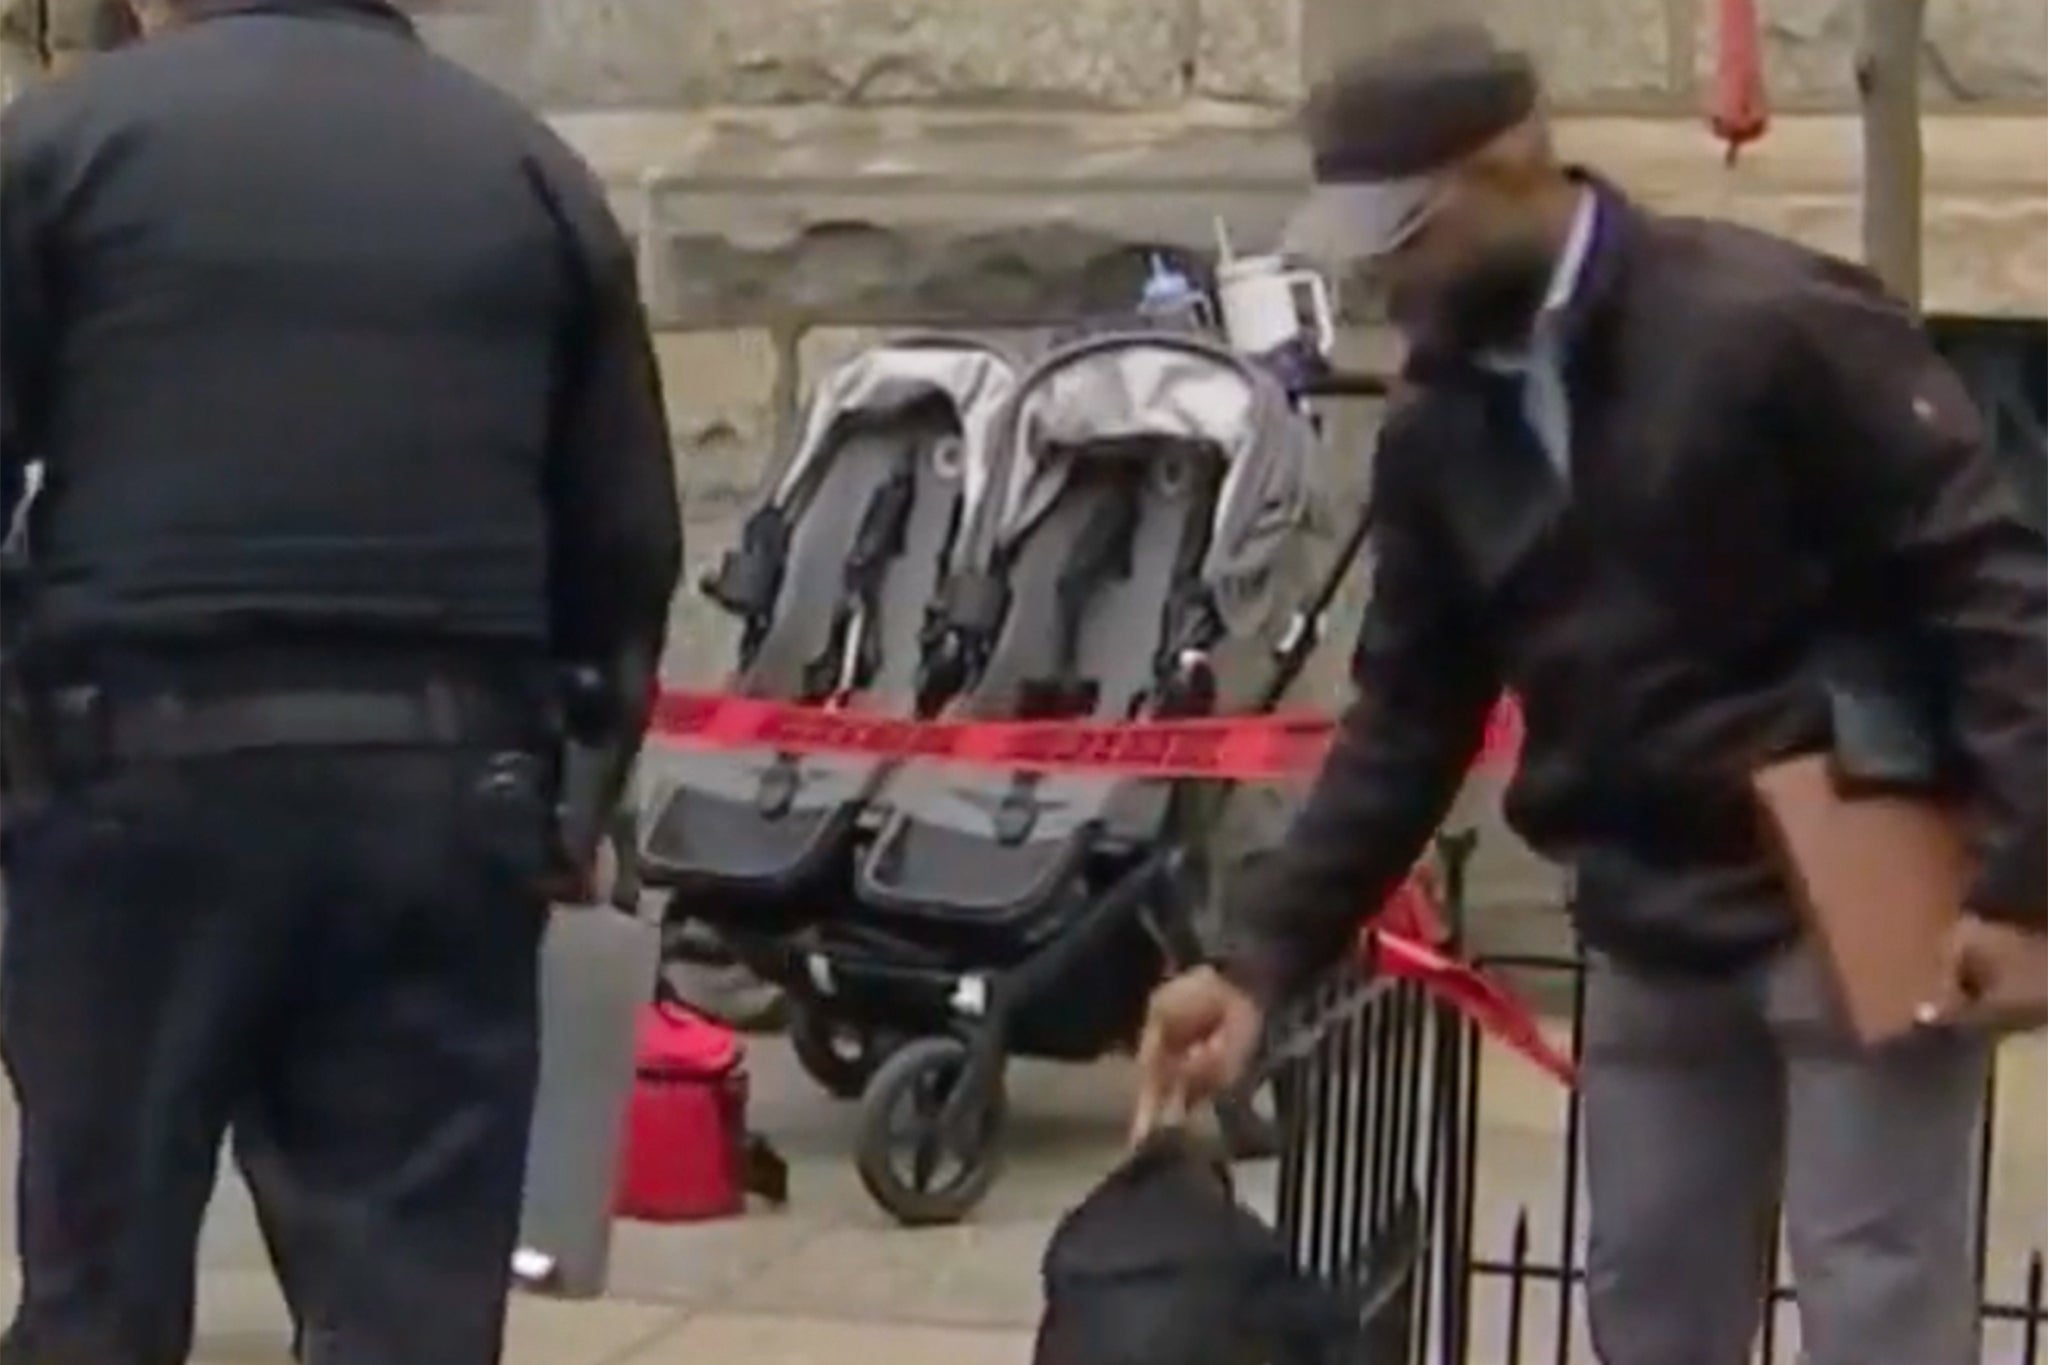 Police cordoned off the stroller at the scene of the attack